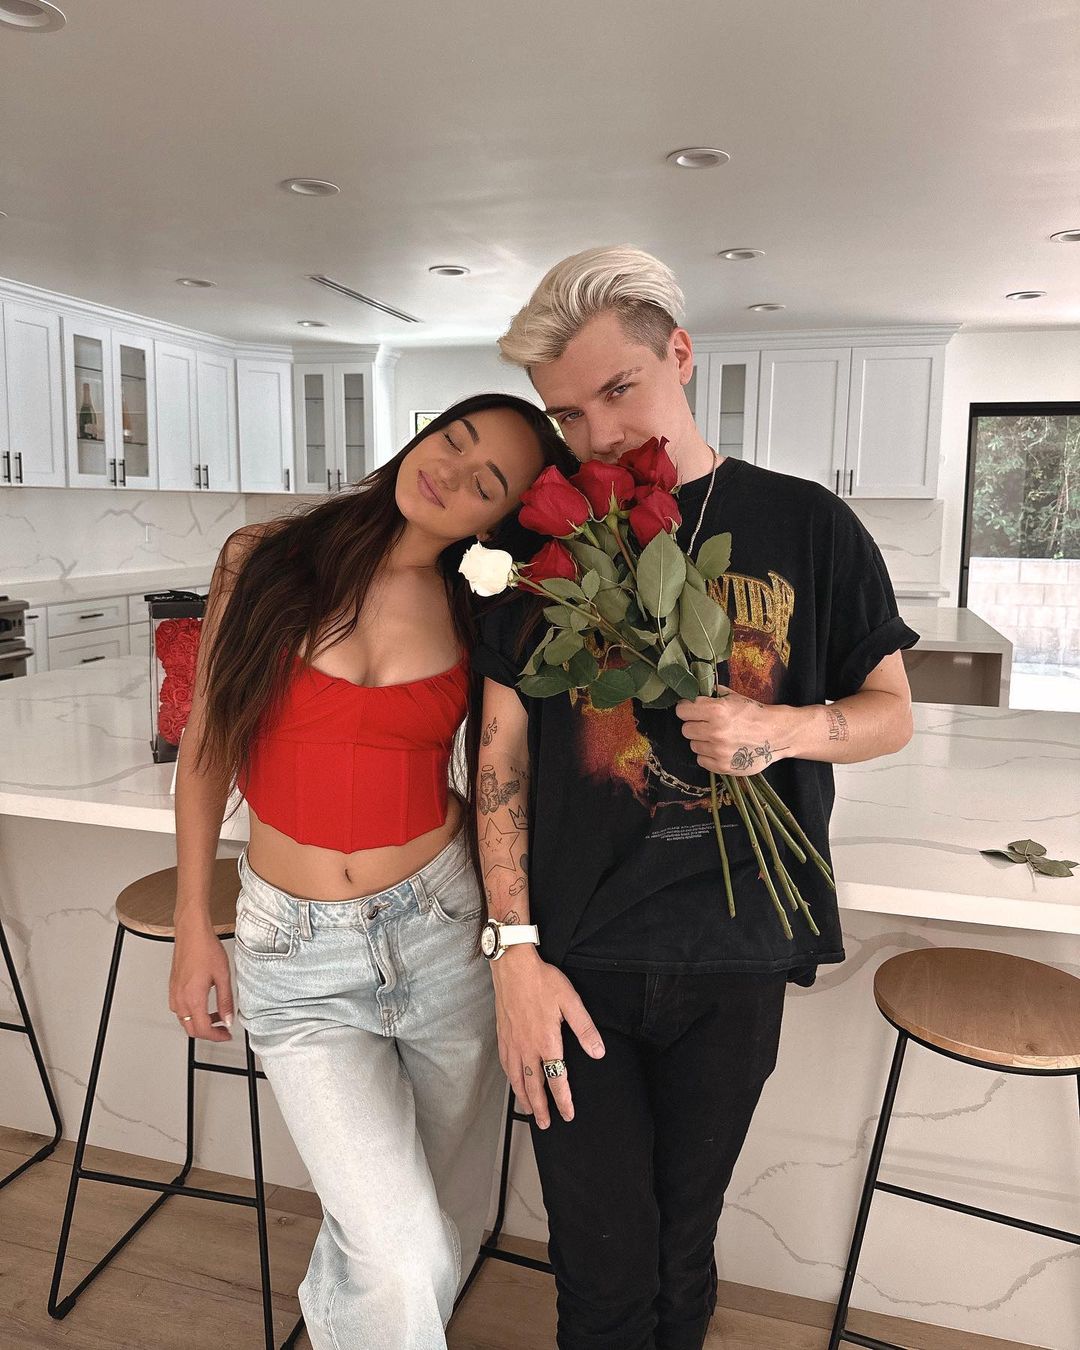 Maddie Joy moved into a new house with her new boyfriend, Gary Grey.